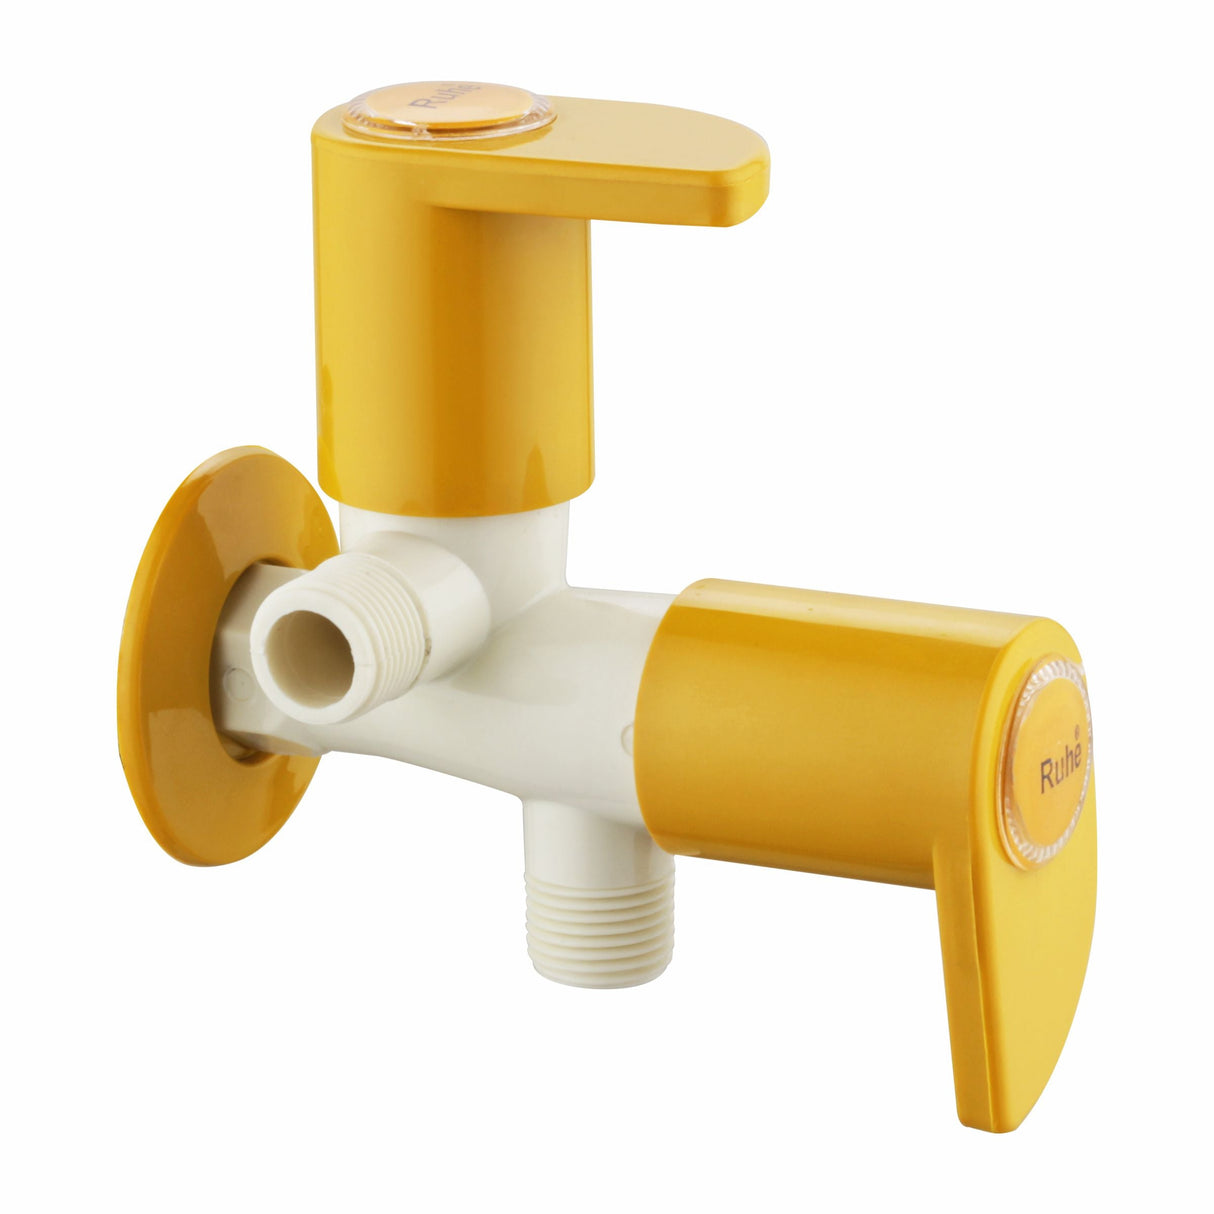 Gold PTMT 2 in 1 Angle Cock Faucet